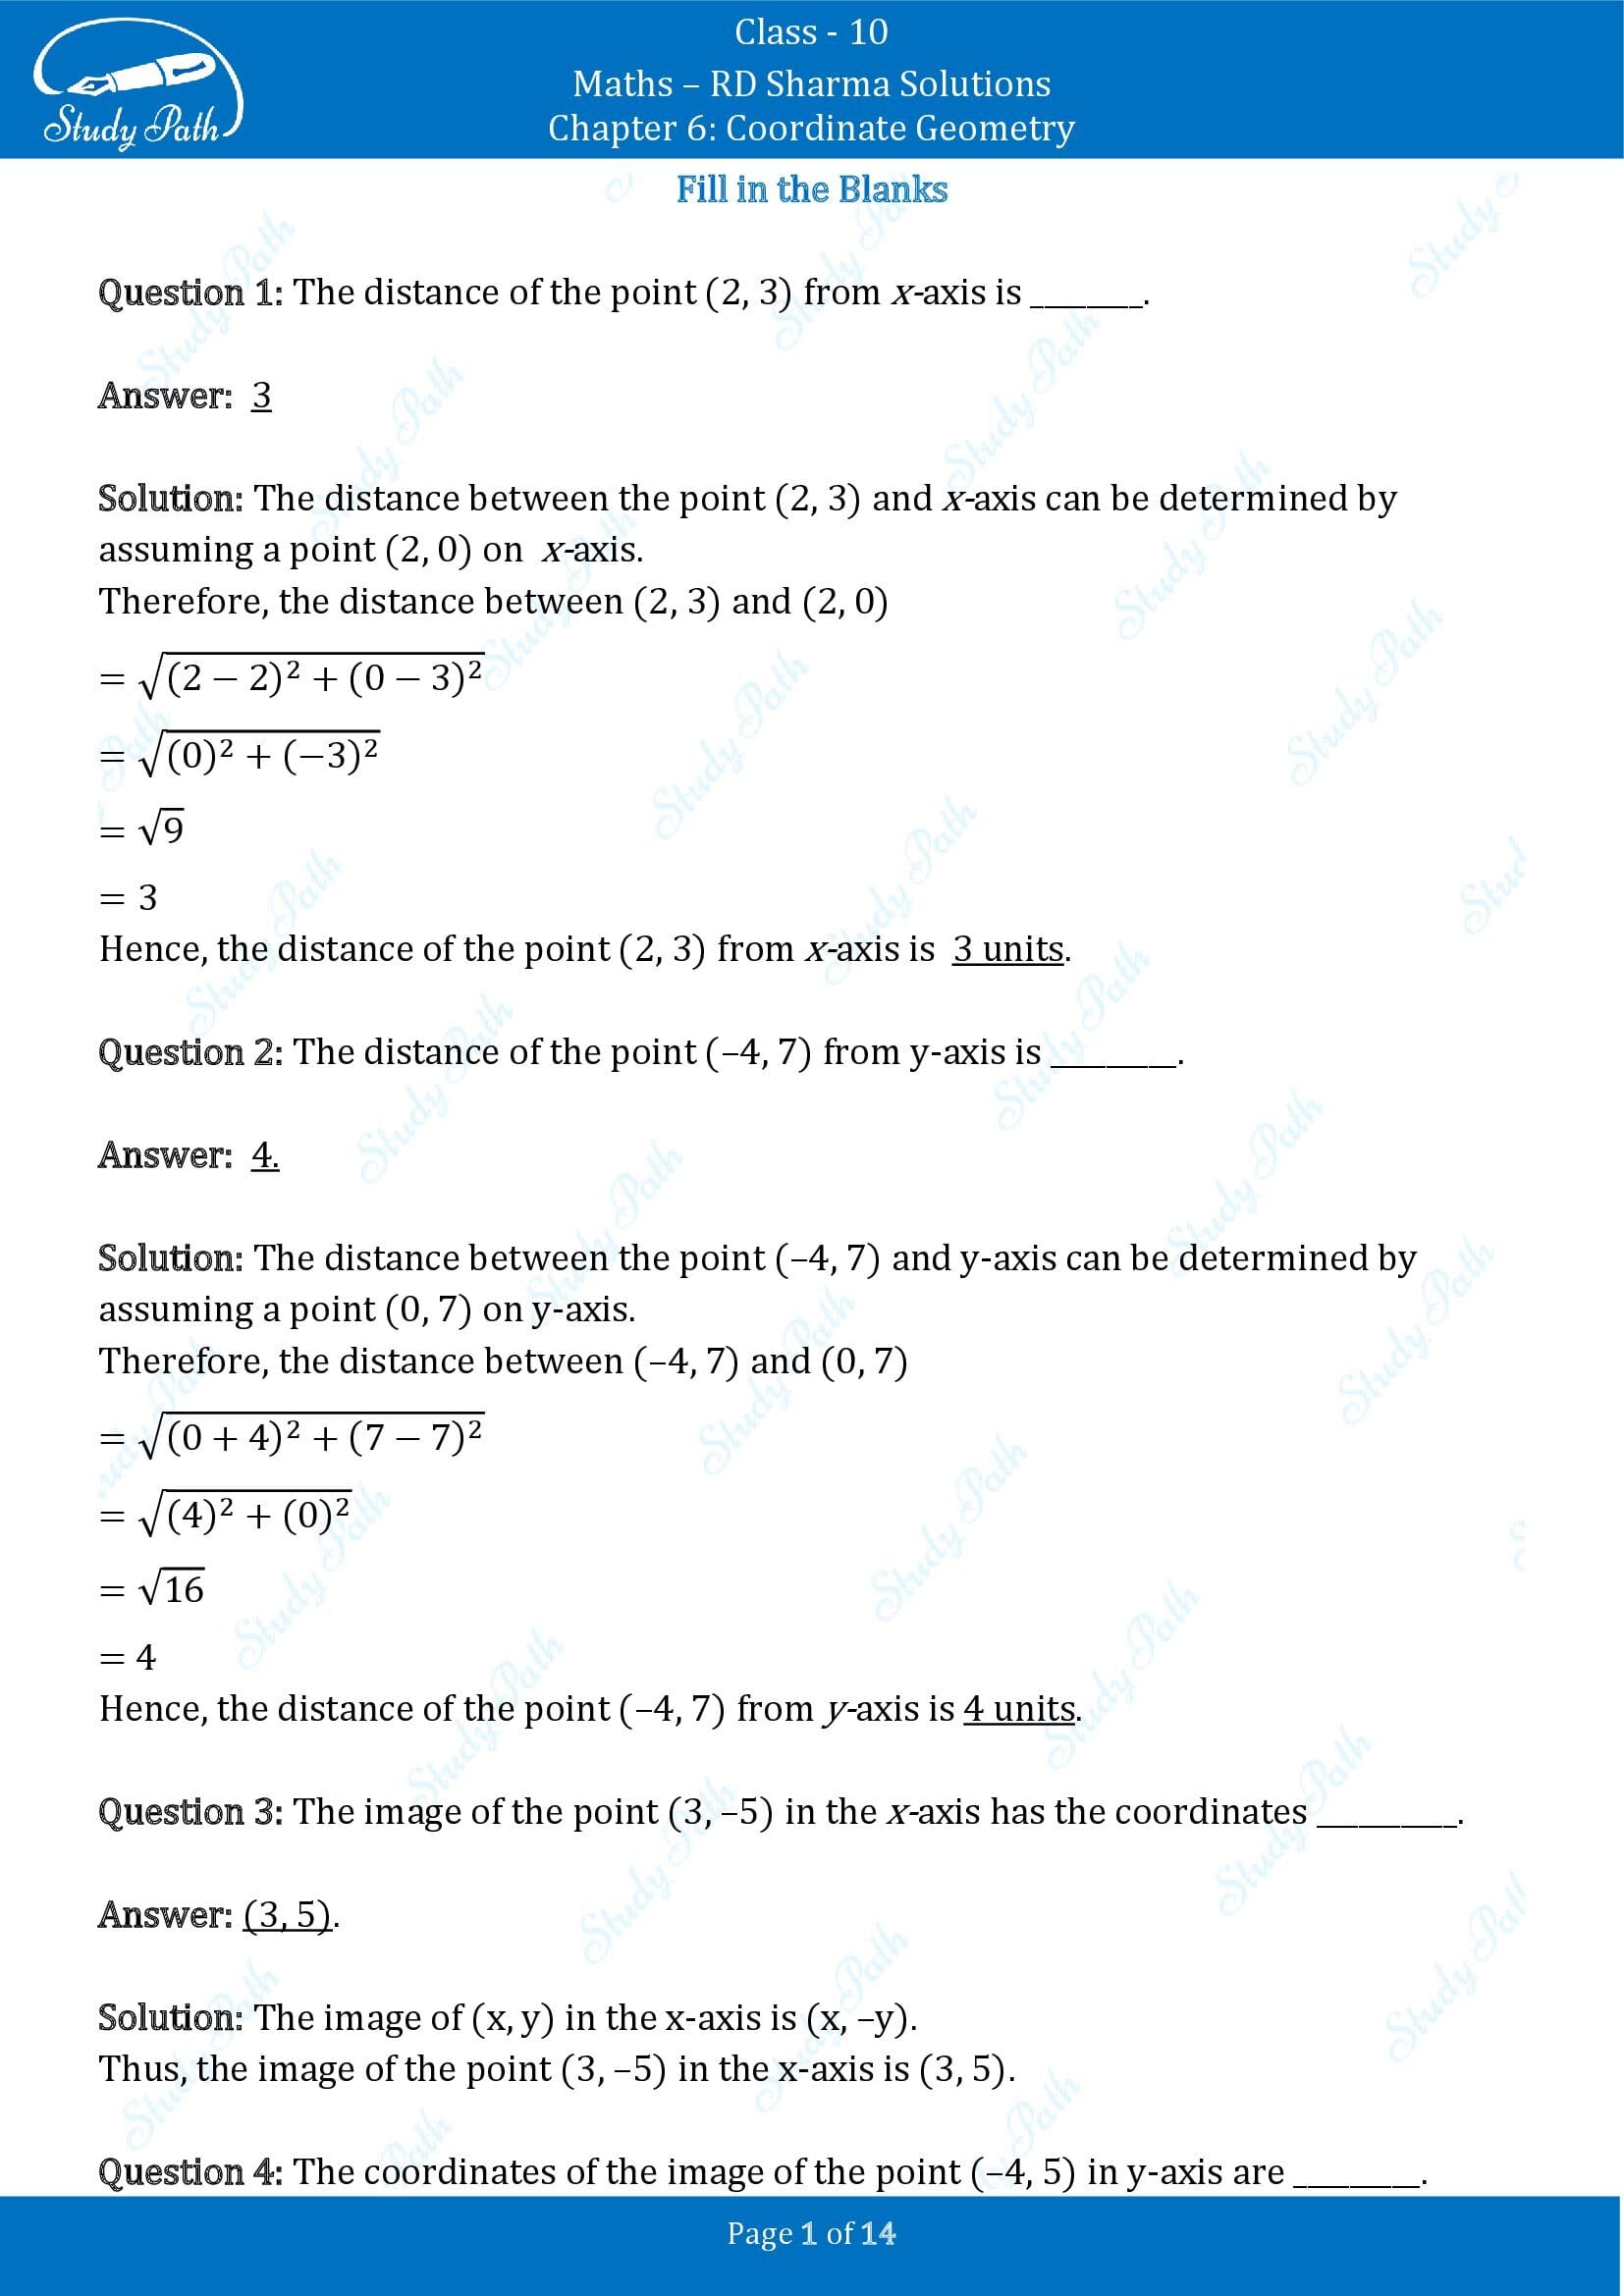 RD Sharma Solutions Class 10 Chapter 6 Coordinate Geometry Fill in the Blank Type Questions FBQs 00001